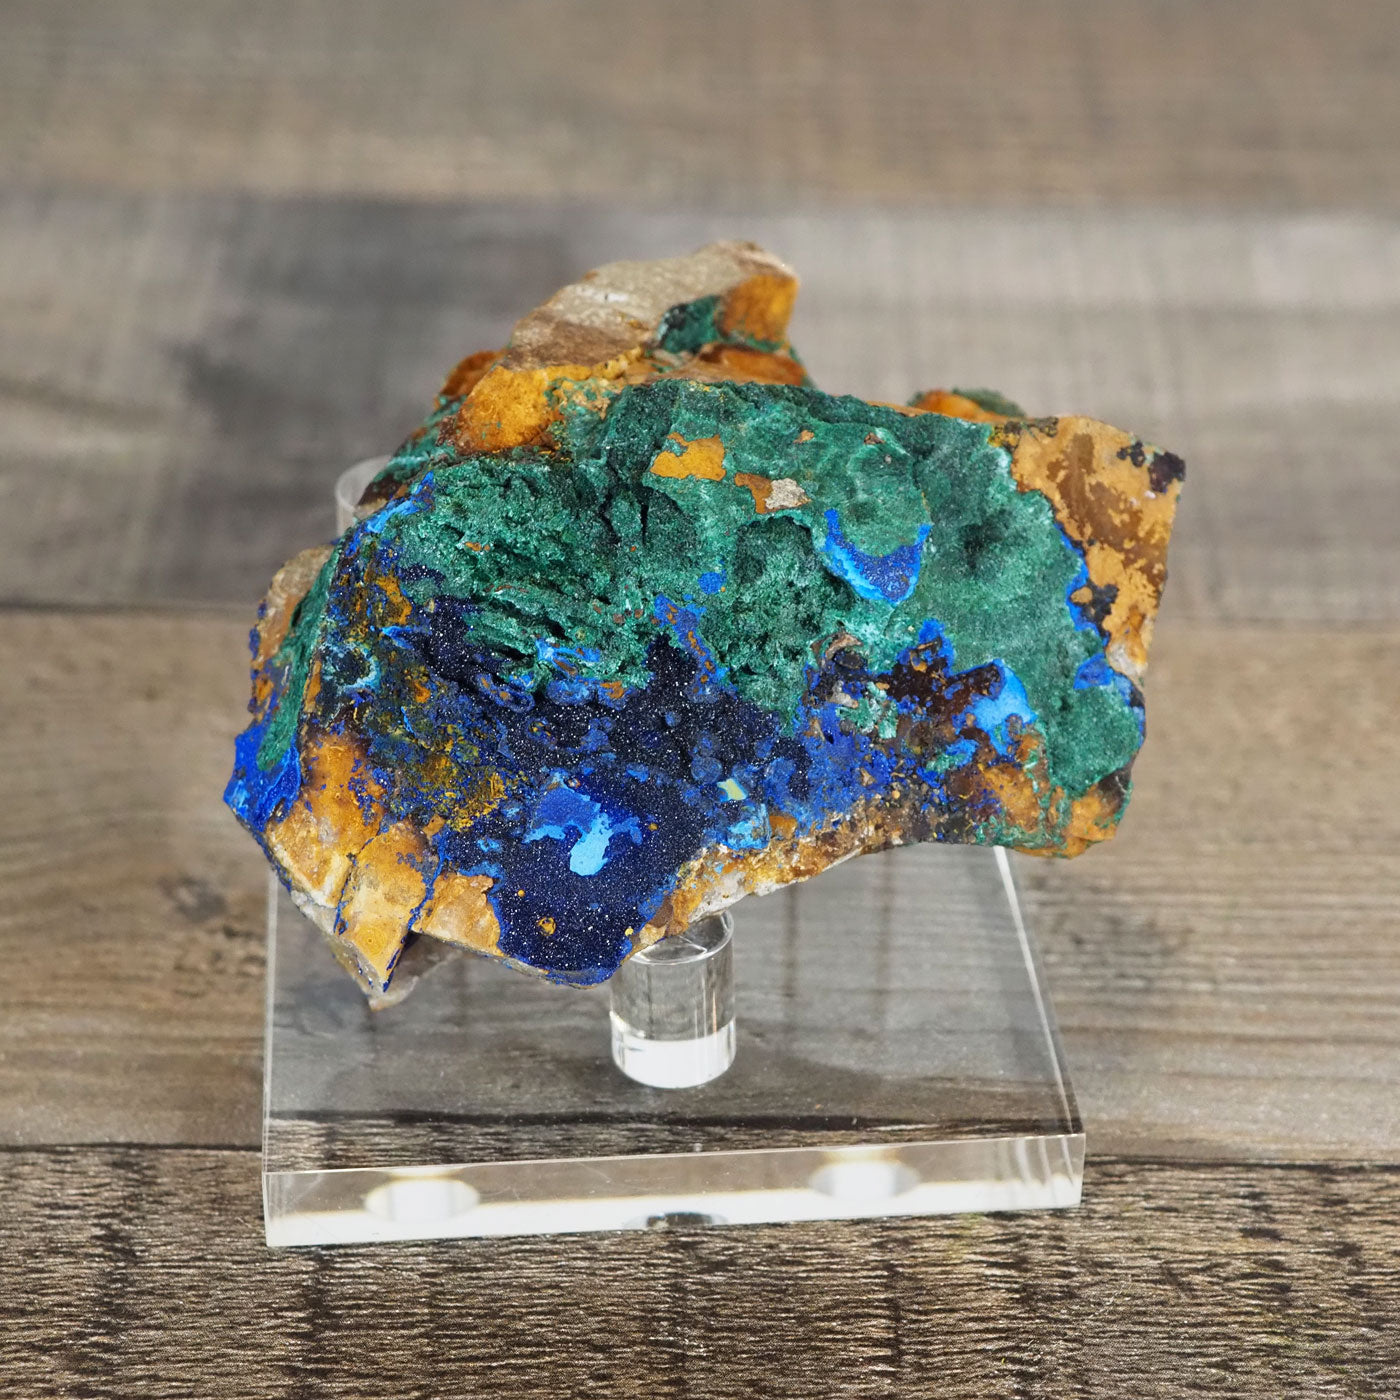 3.2" long Sparkly Azurite with Fibrous Malachite